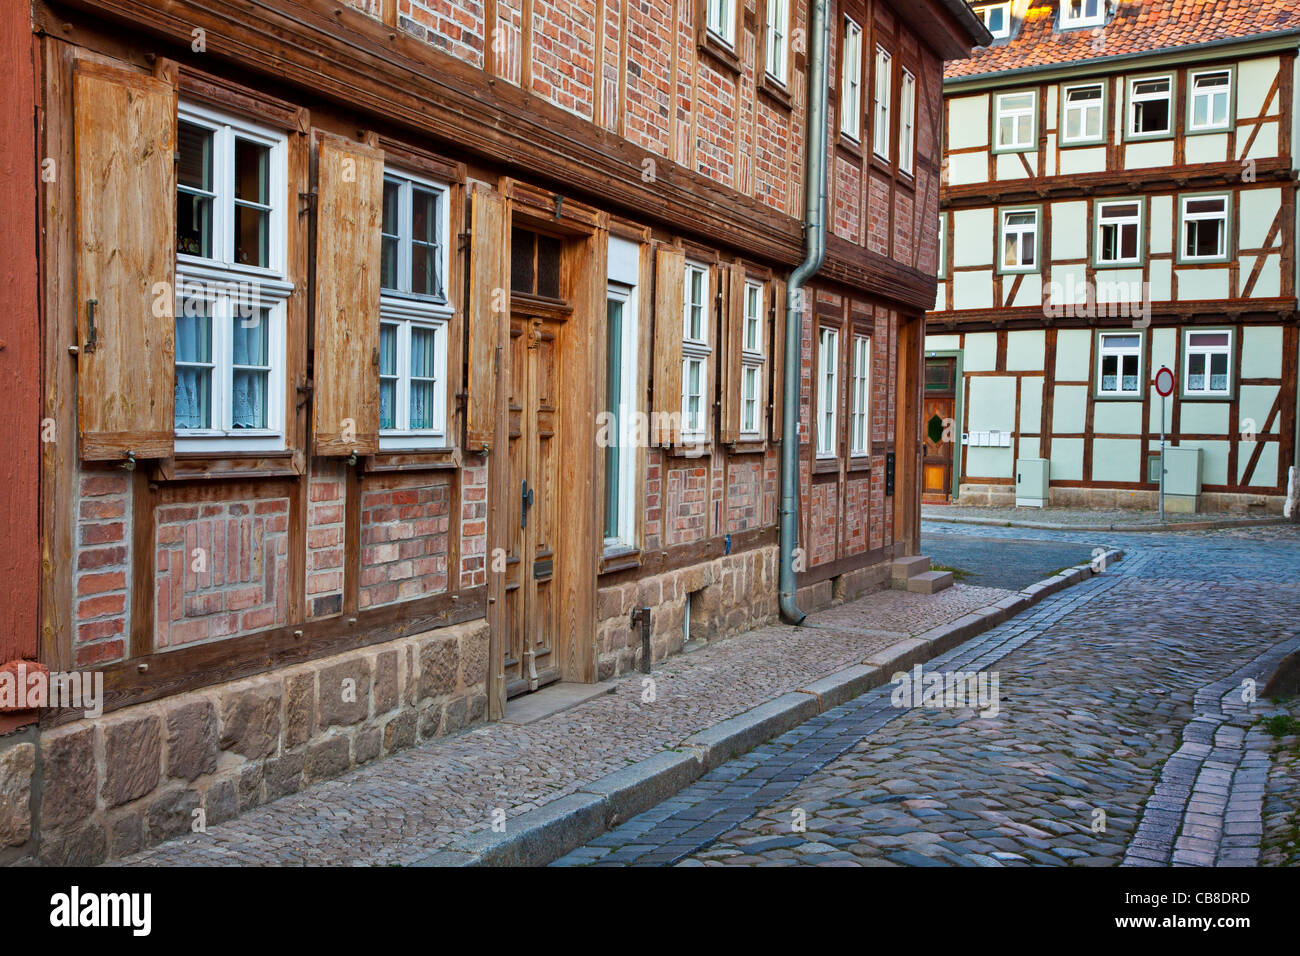 Half-timbered medieval houses in a cobbled street in the UNESCO World Heritage town of Quedlinburg, Germany. Stock Photo